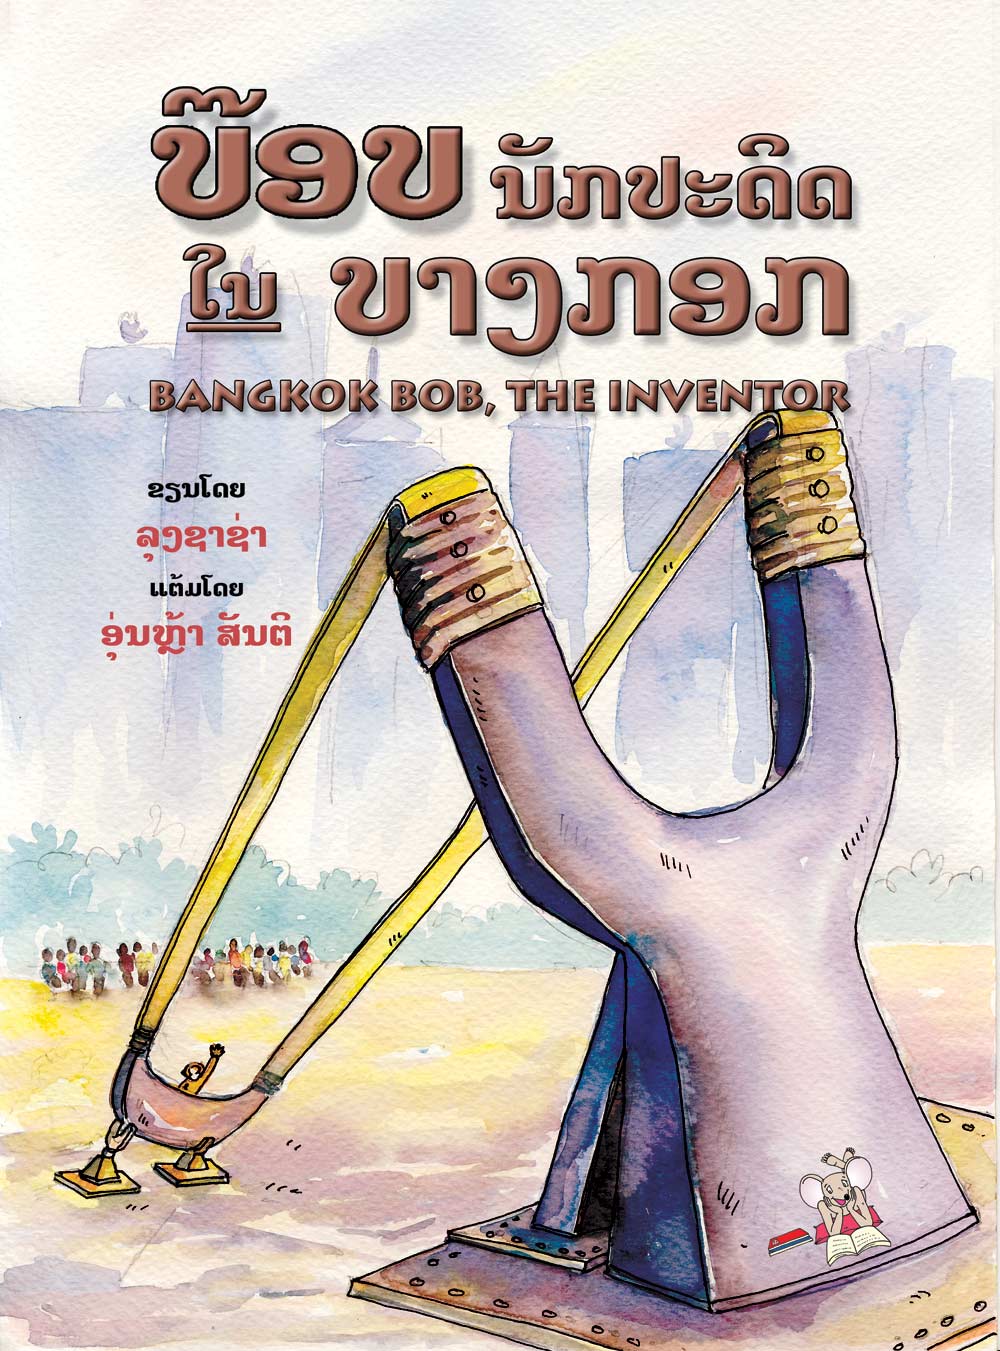 Bangkok Bob, the Inventor large book cover, published in Lao and English